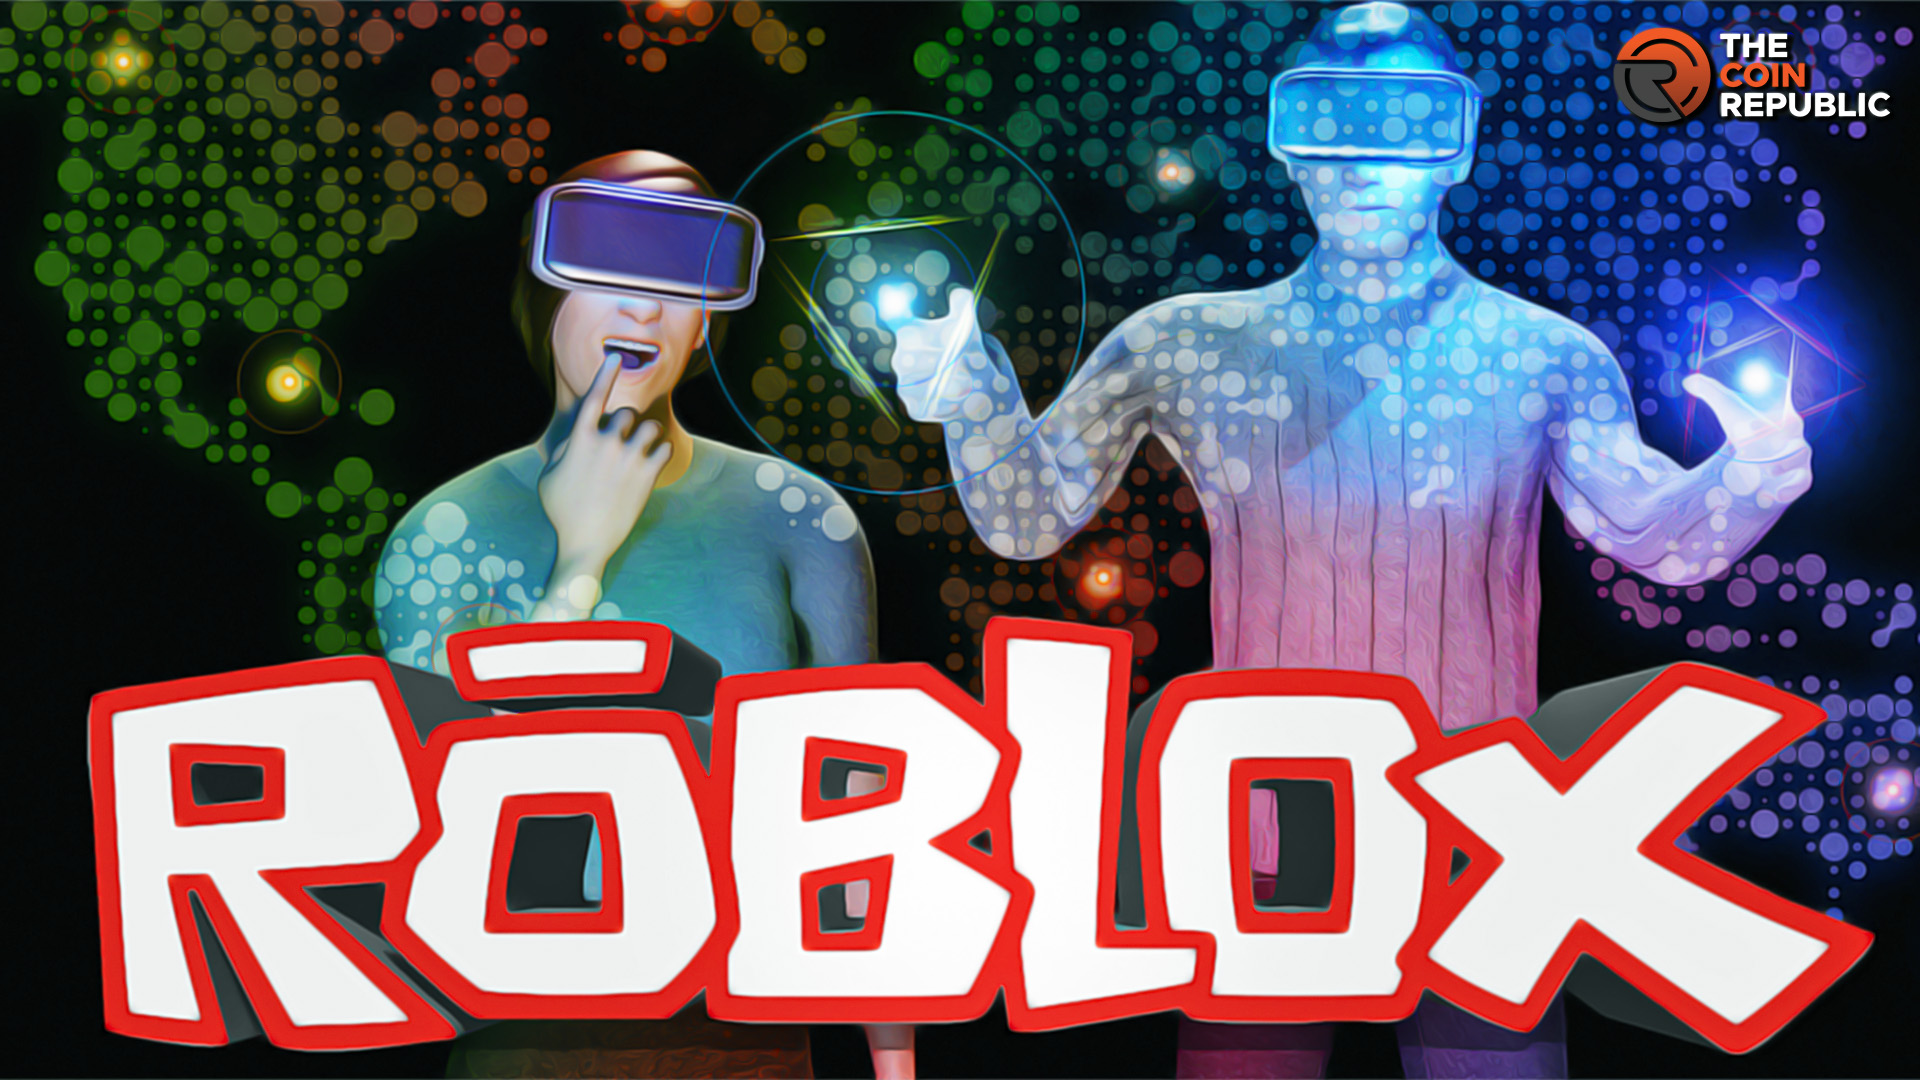 Roblox shows new bits of the metaverse to its developers